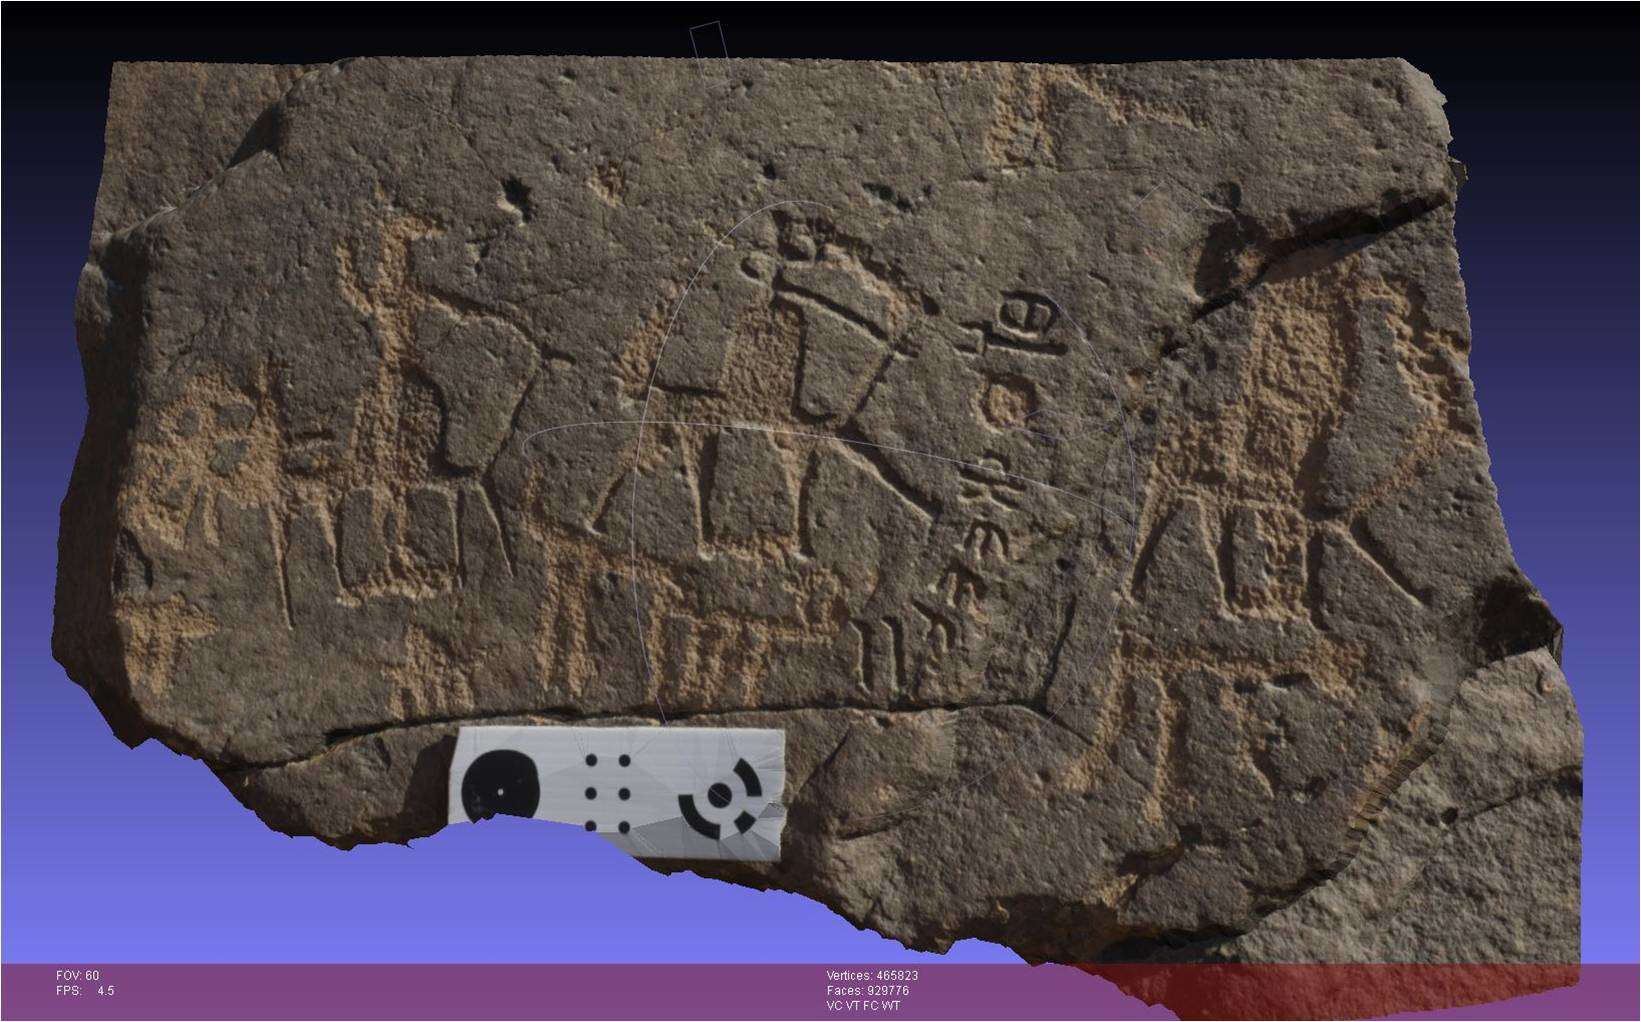 A three-dimensional computerized rendering of a stone surface carved with a Hismaic inscription and several camel drawings created using digital photogrammetry. Photo by Glenn Corbett.